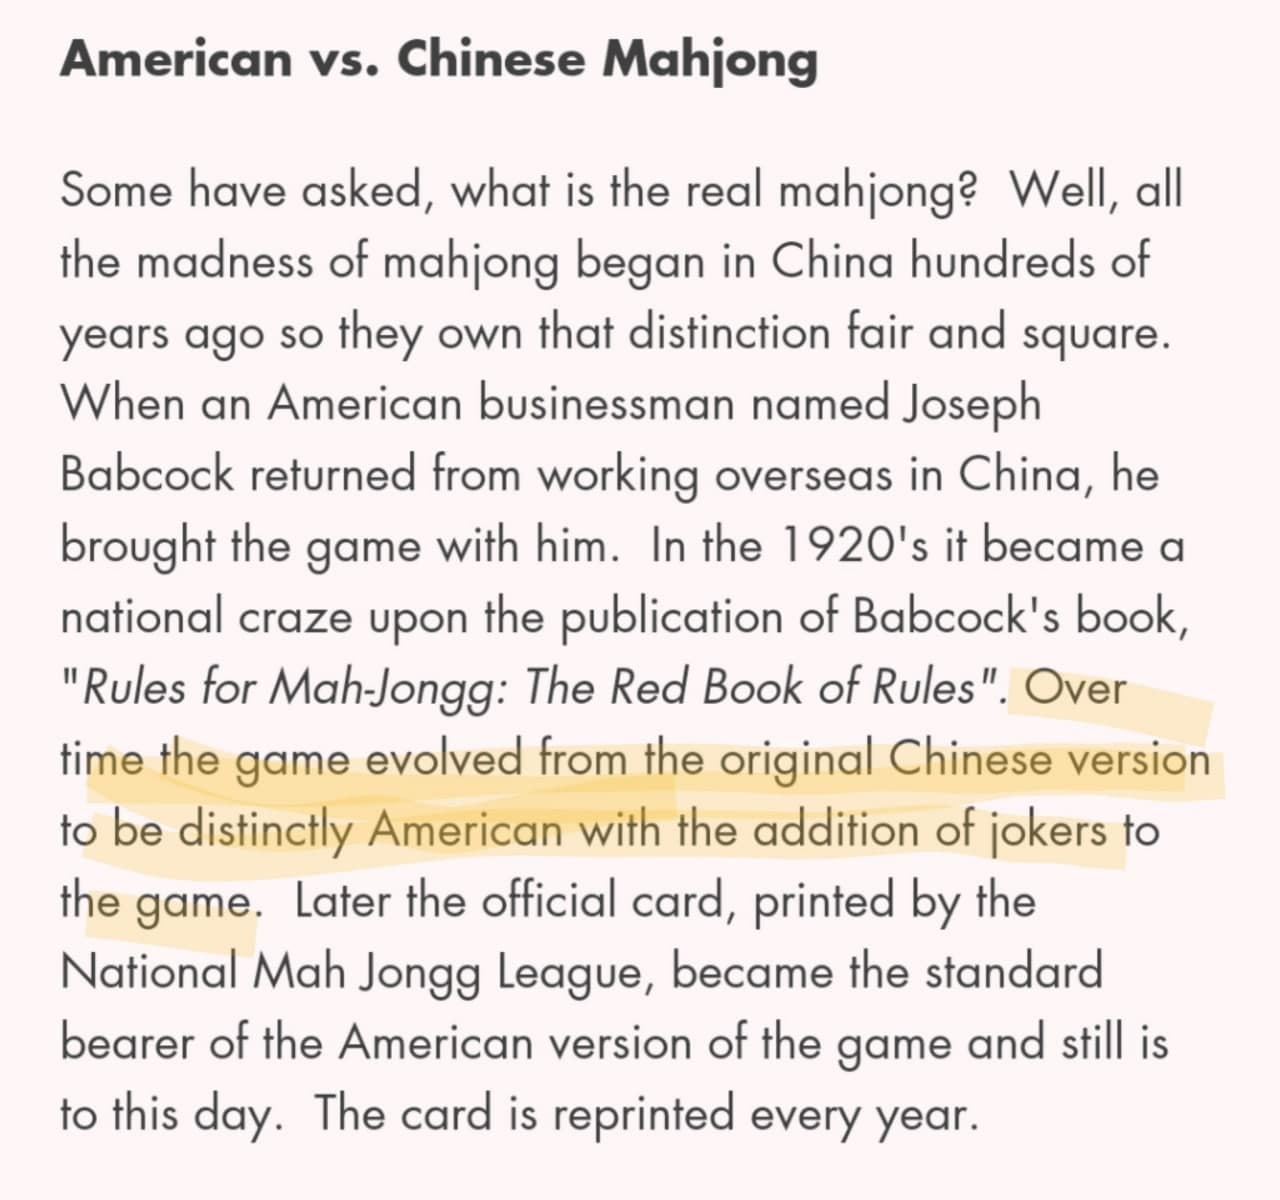 US Mahjong Company Gets Flak For Cultural Appropriation, Later